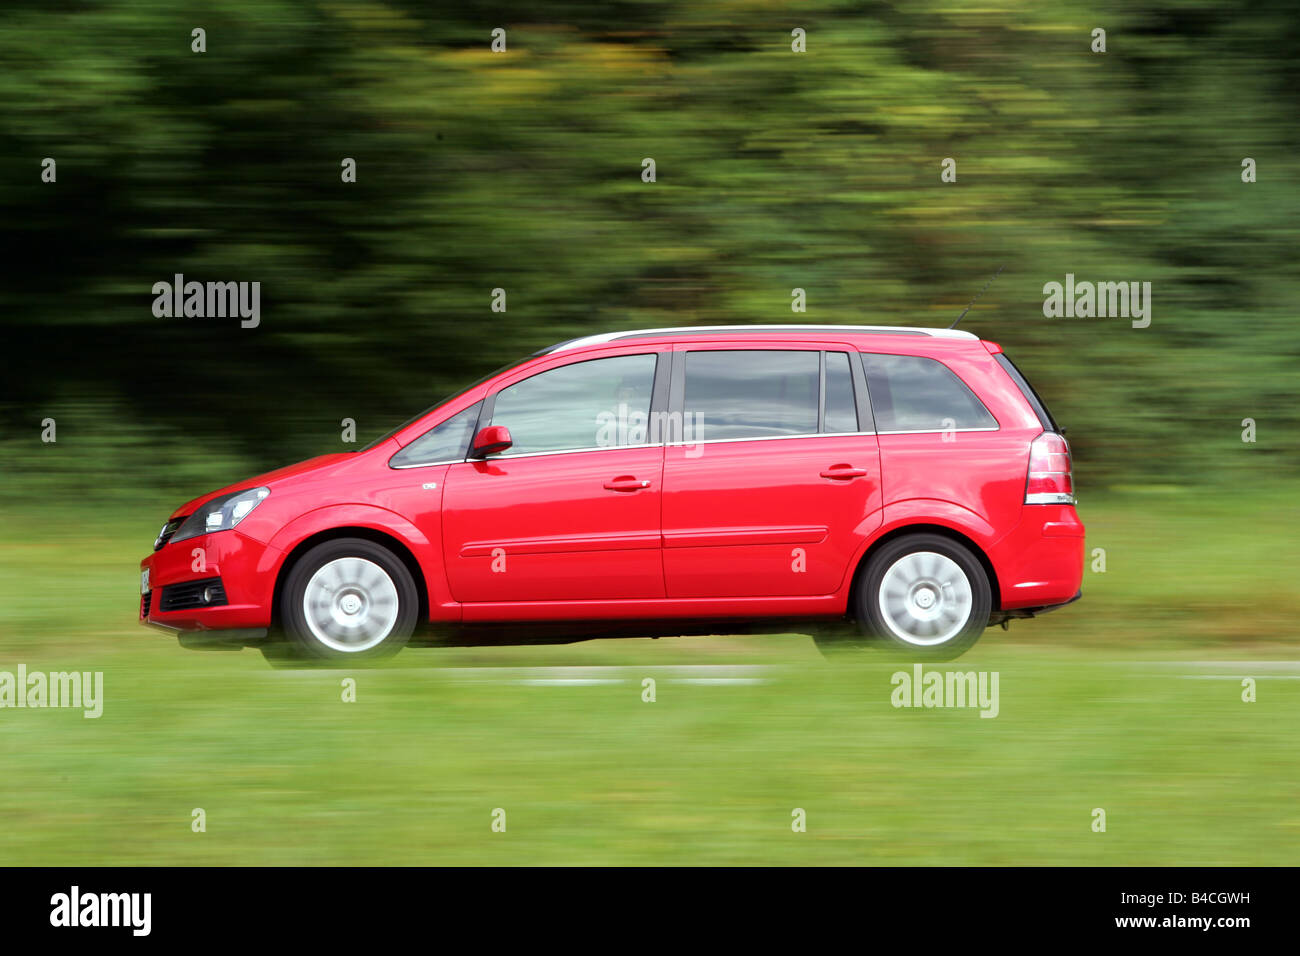 Opel Zafira 1.8 Edition , model year 2005-, red, driving, side view, country road Stock Photo